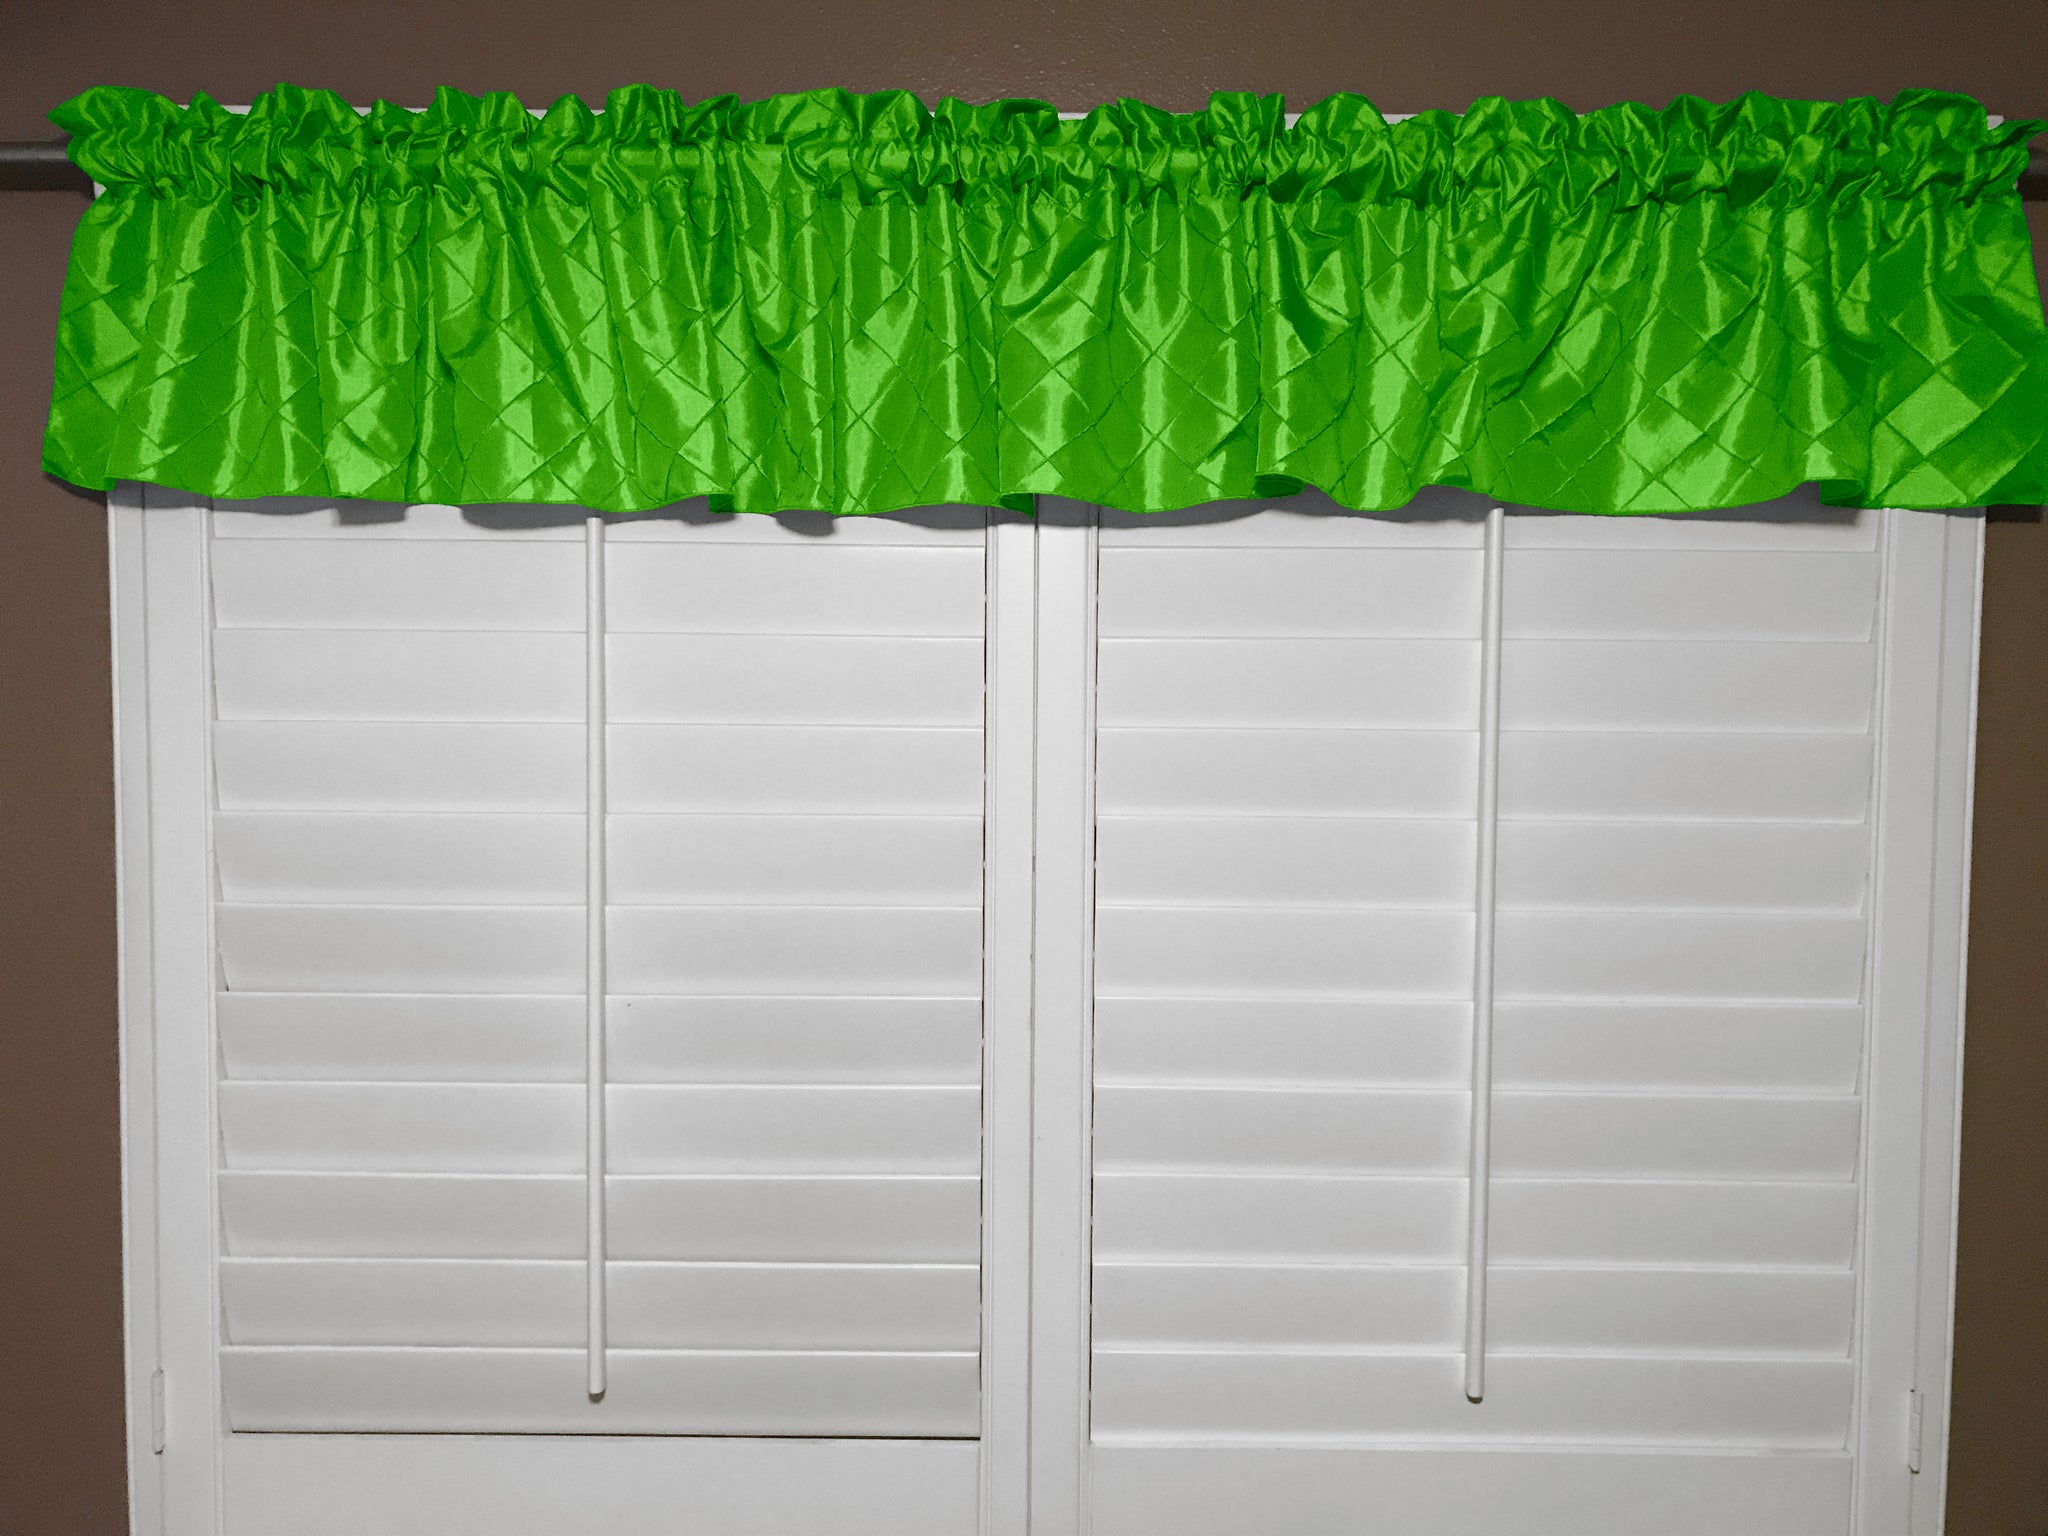 Magnificent lime green window valance Pintuck Window Valance 52 Wide Lime Green Lovemyfabric